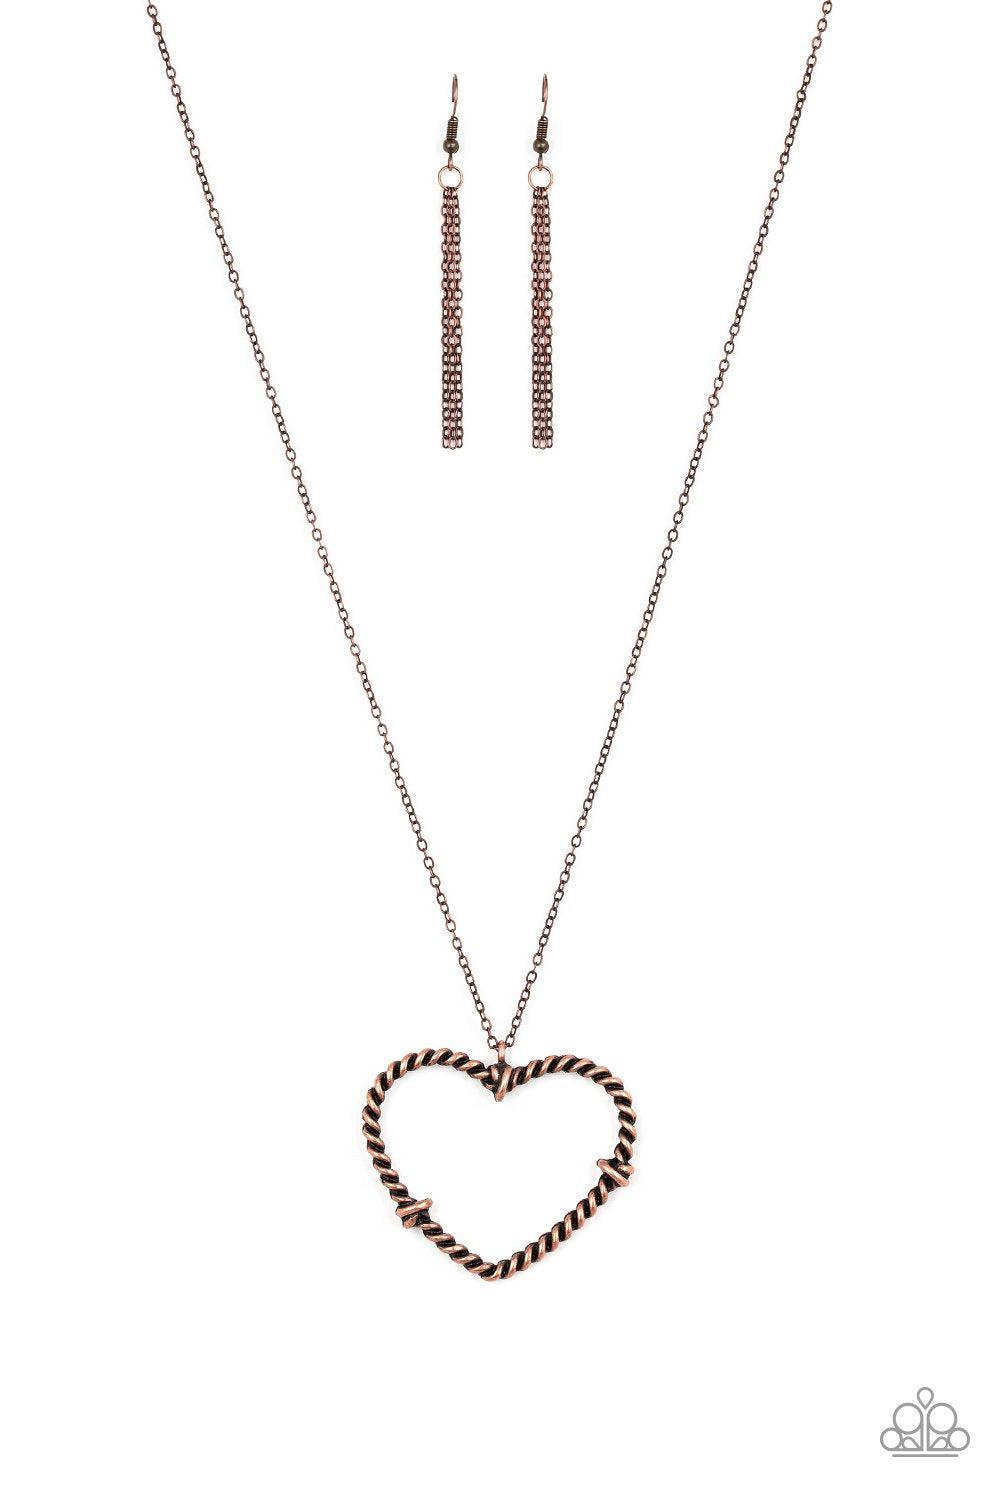 Straight From The Heart Copper Heart Necklace - Paparazzi Accessories - lightbox -CarasShop.com - $5 Jewelry by Cara Jewels